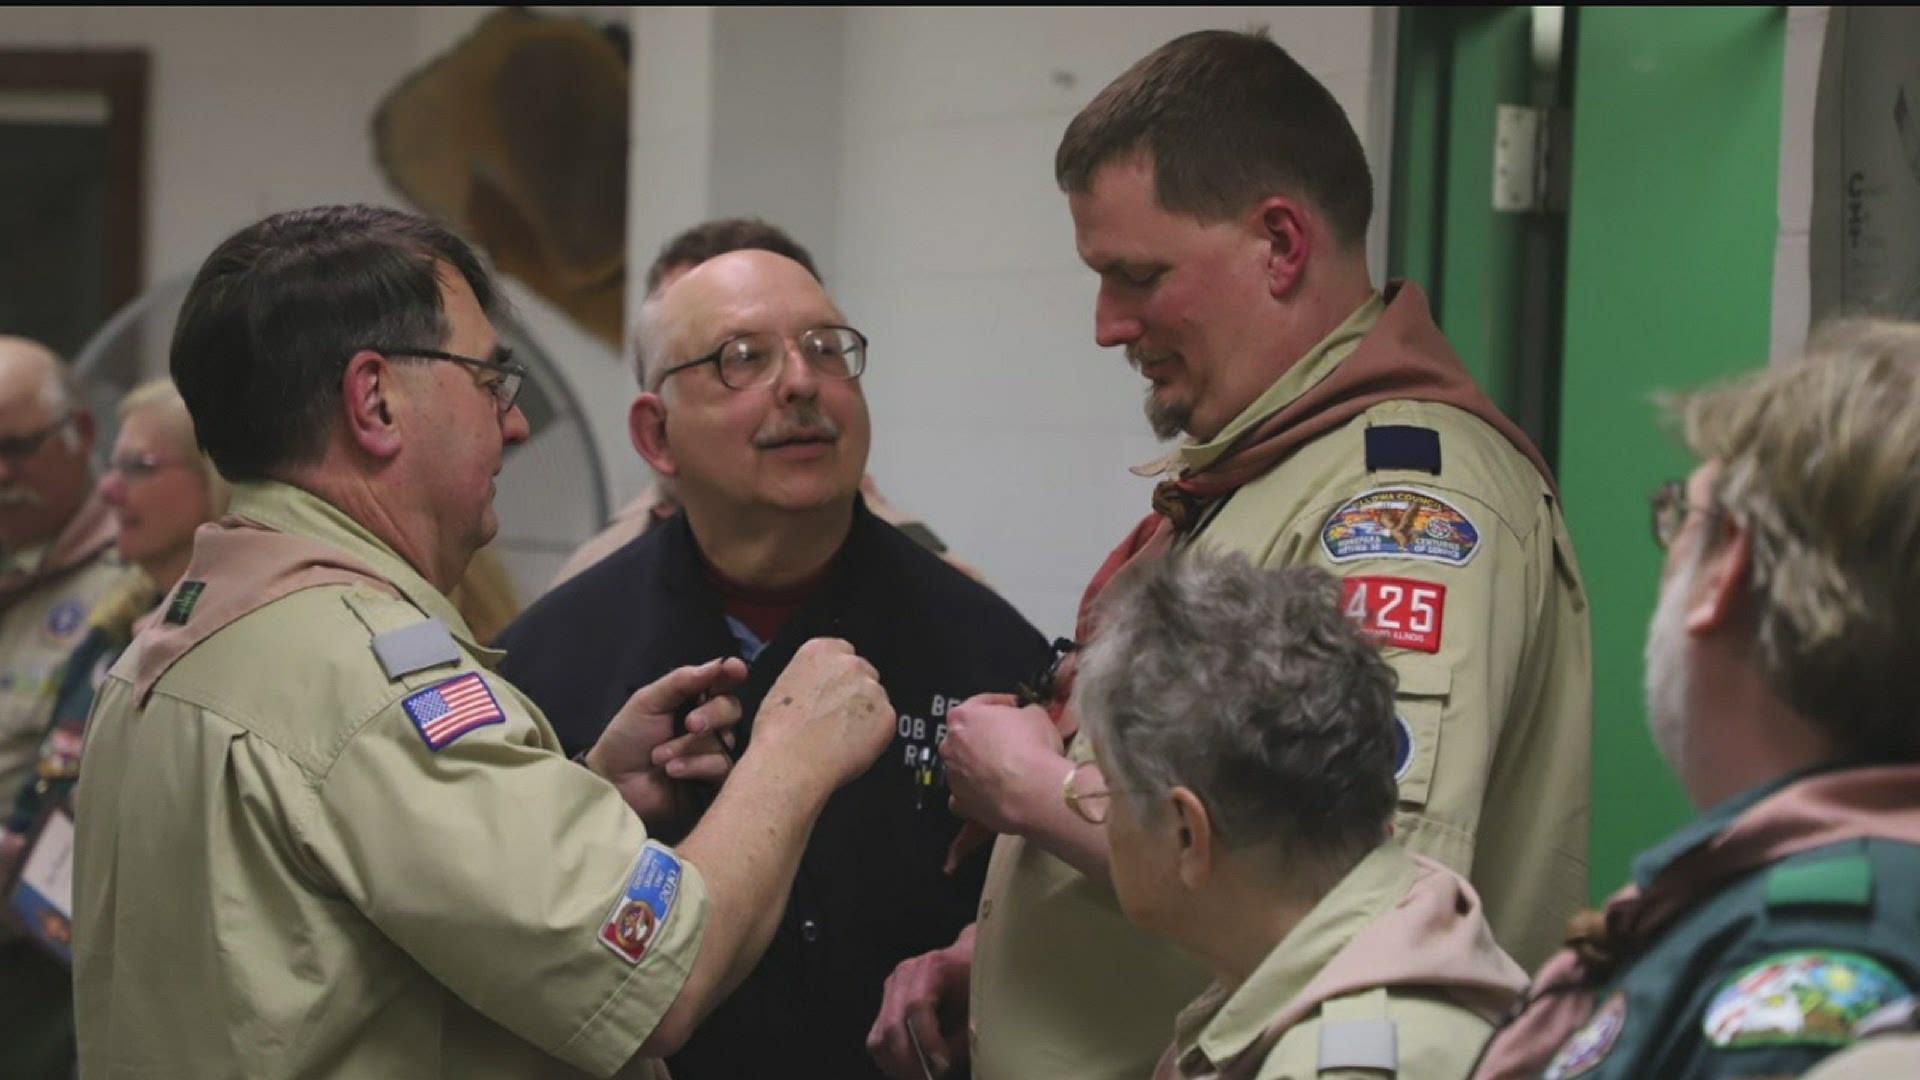 Ben is remembered for his decades of service to the Boy Scouts, volunteering for 40 years.